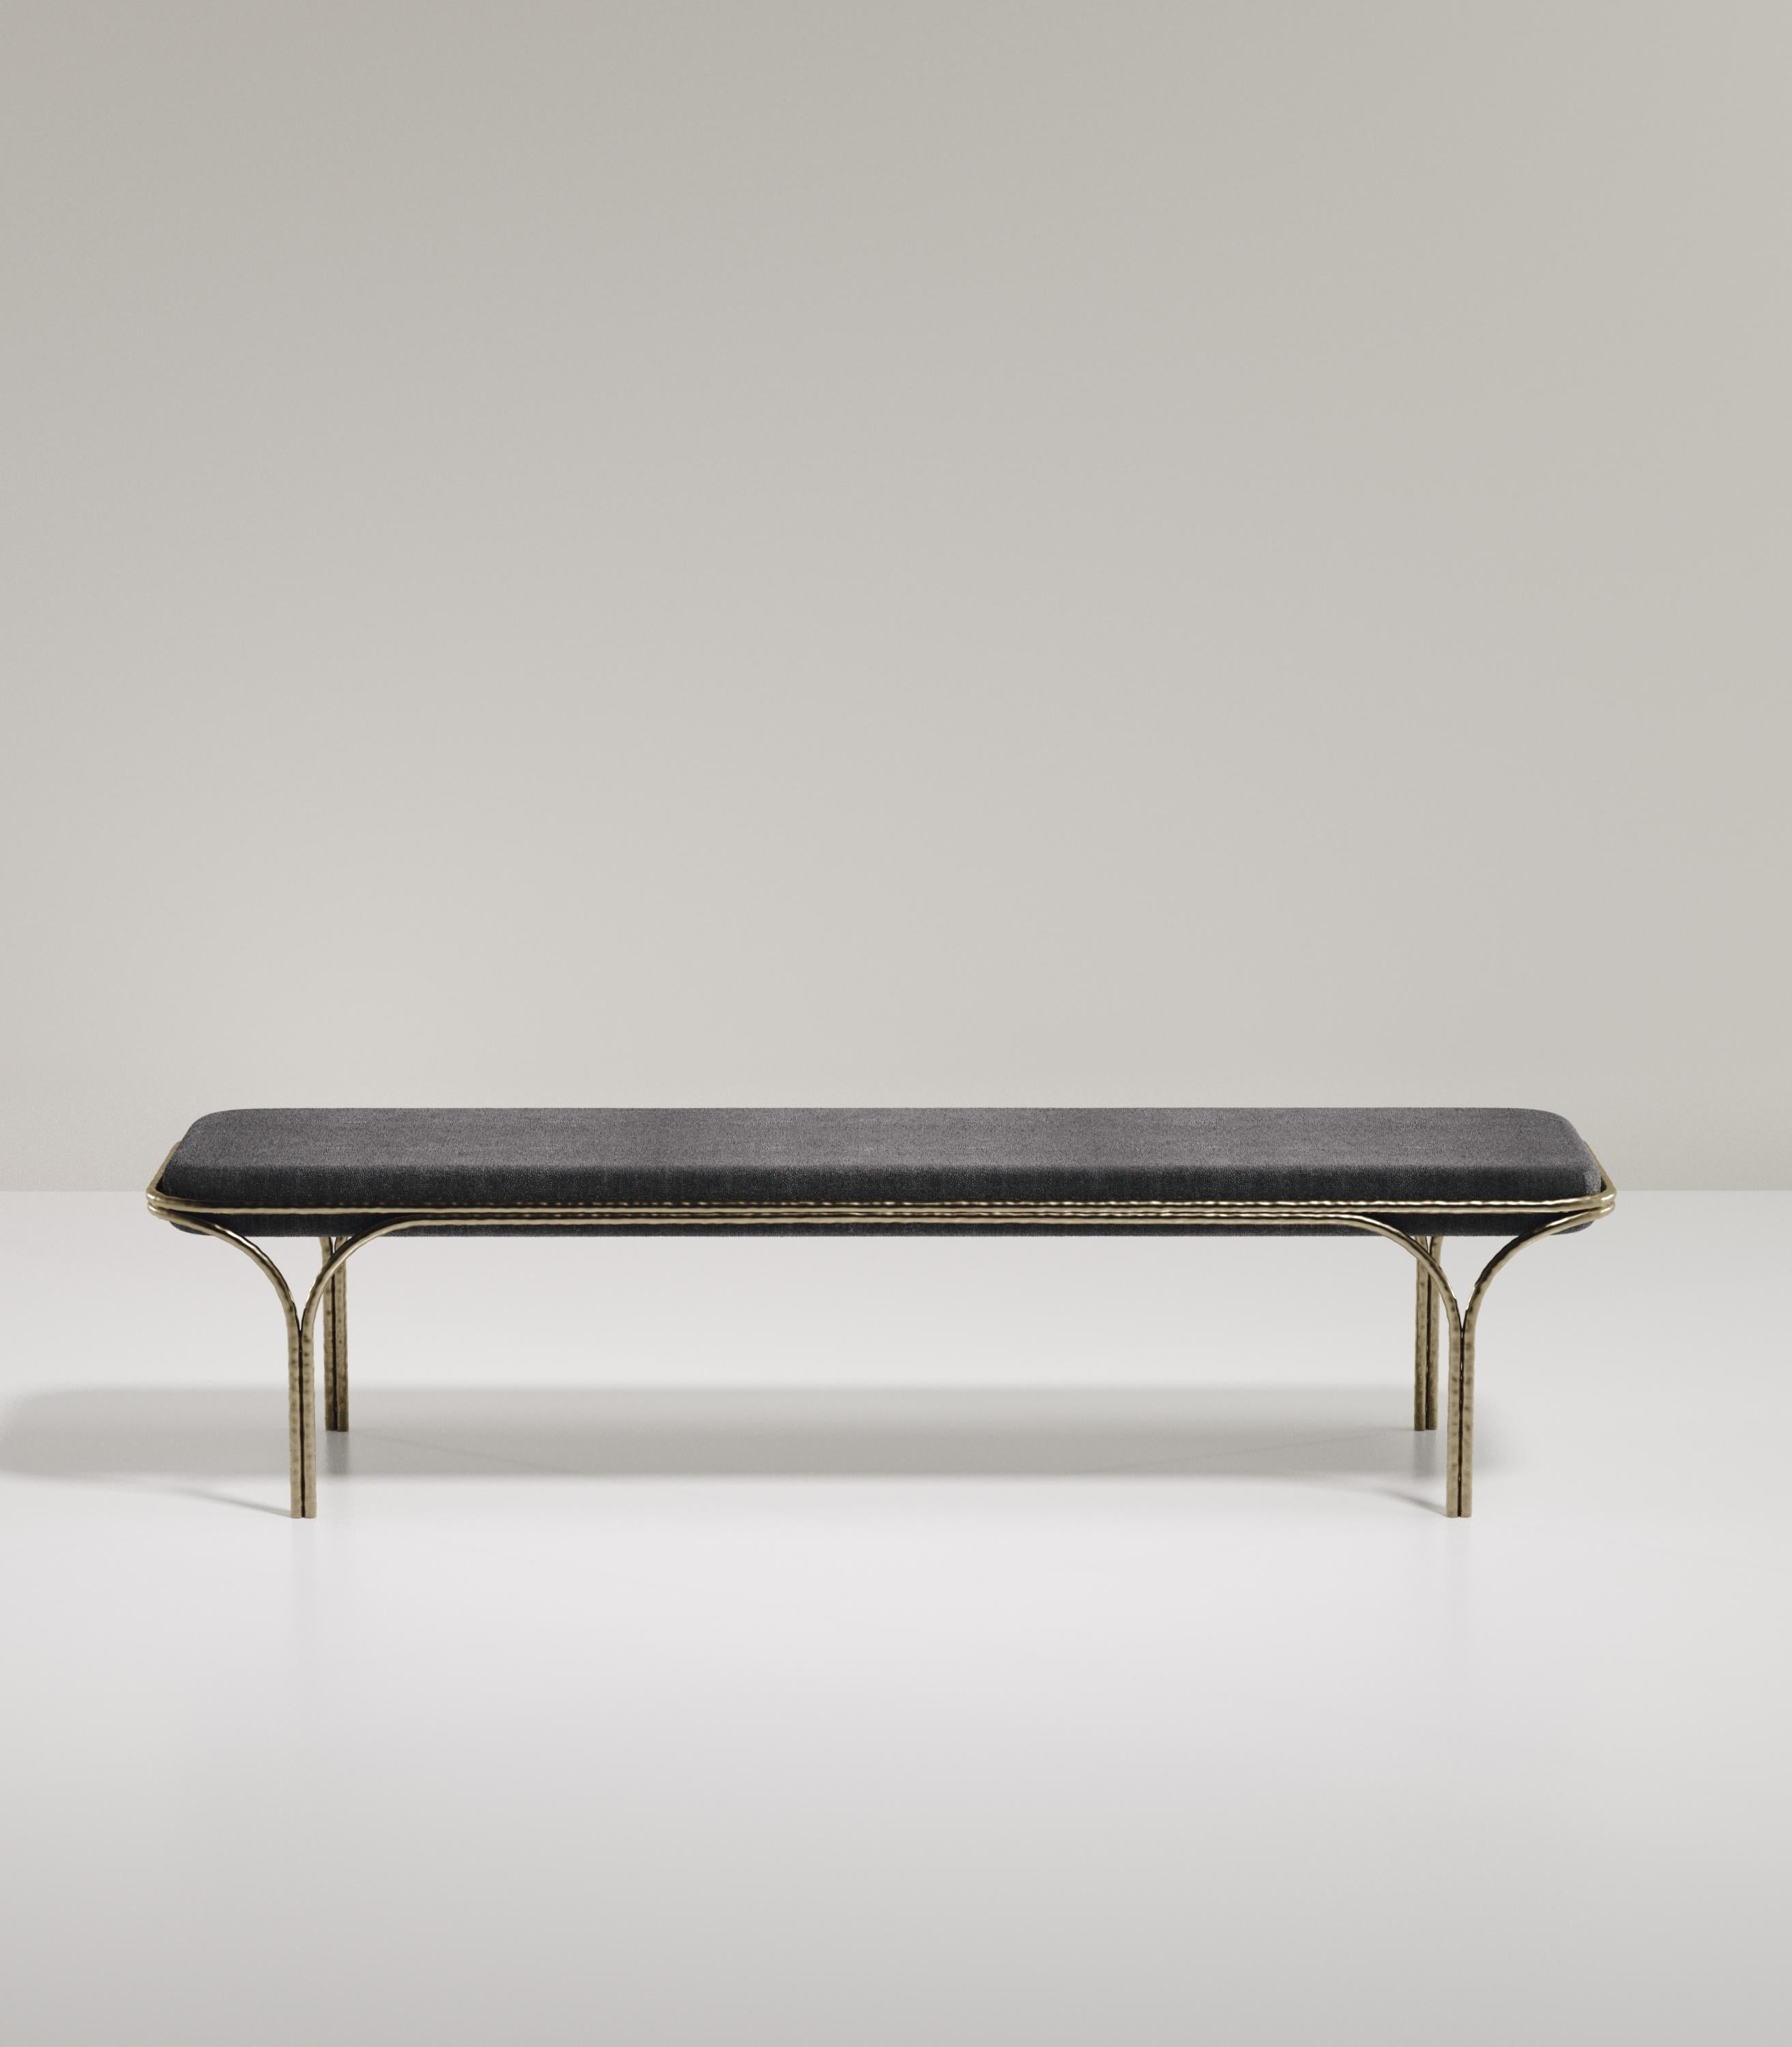 The Arianne Bench by R&Y Augousti is an elegant piece for any space. The coal black shagreen seat, with curved edges, sits on an organic bronze-patina frame. The intricate frame and legs have a 